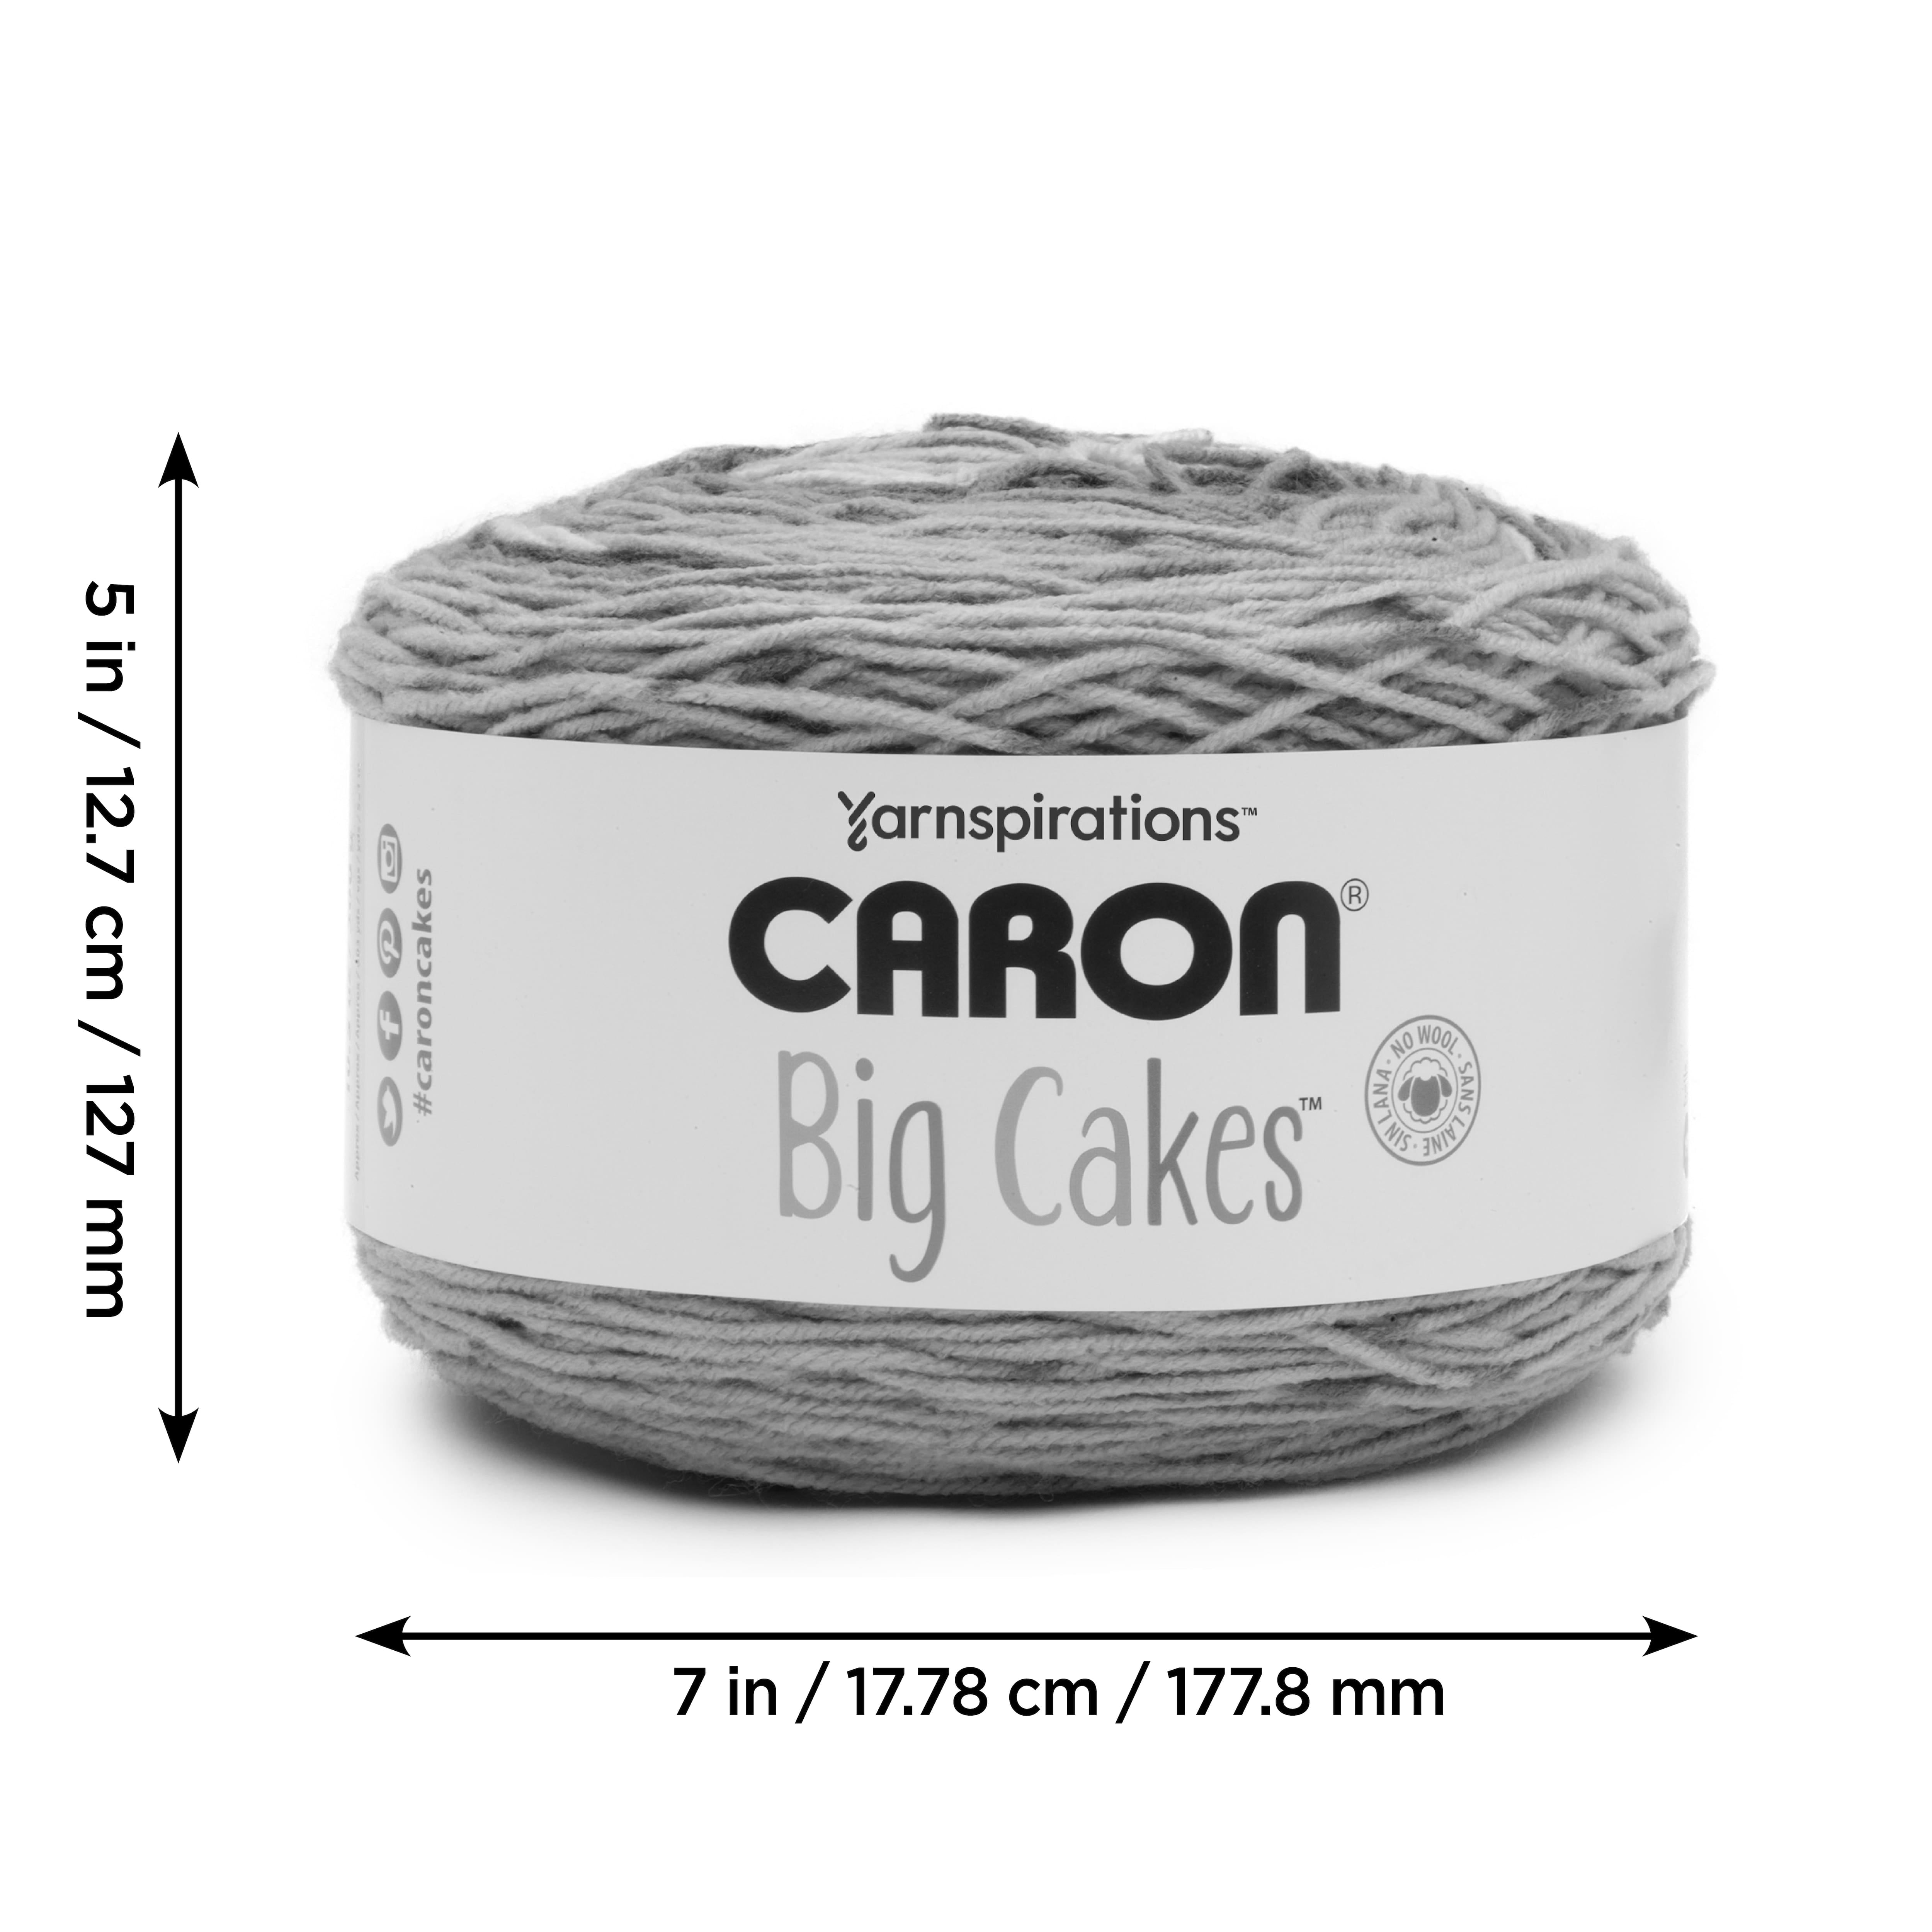 Caron Cakes 350m (1 stores) find the best prices today »